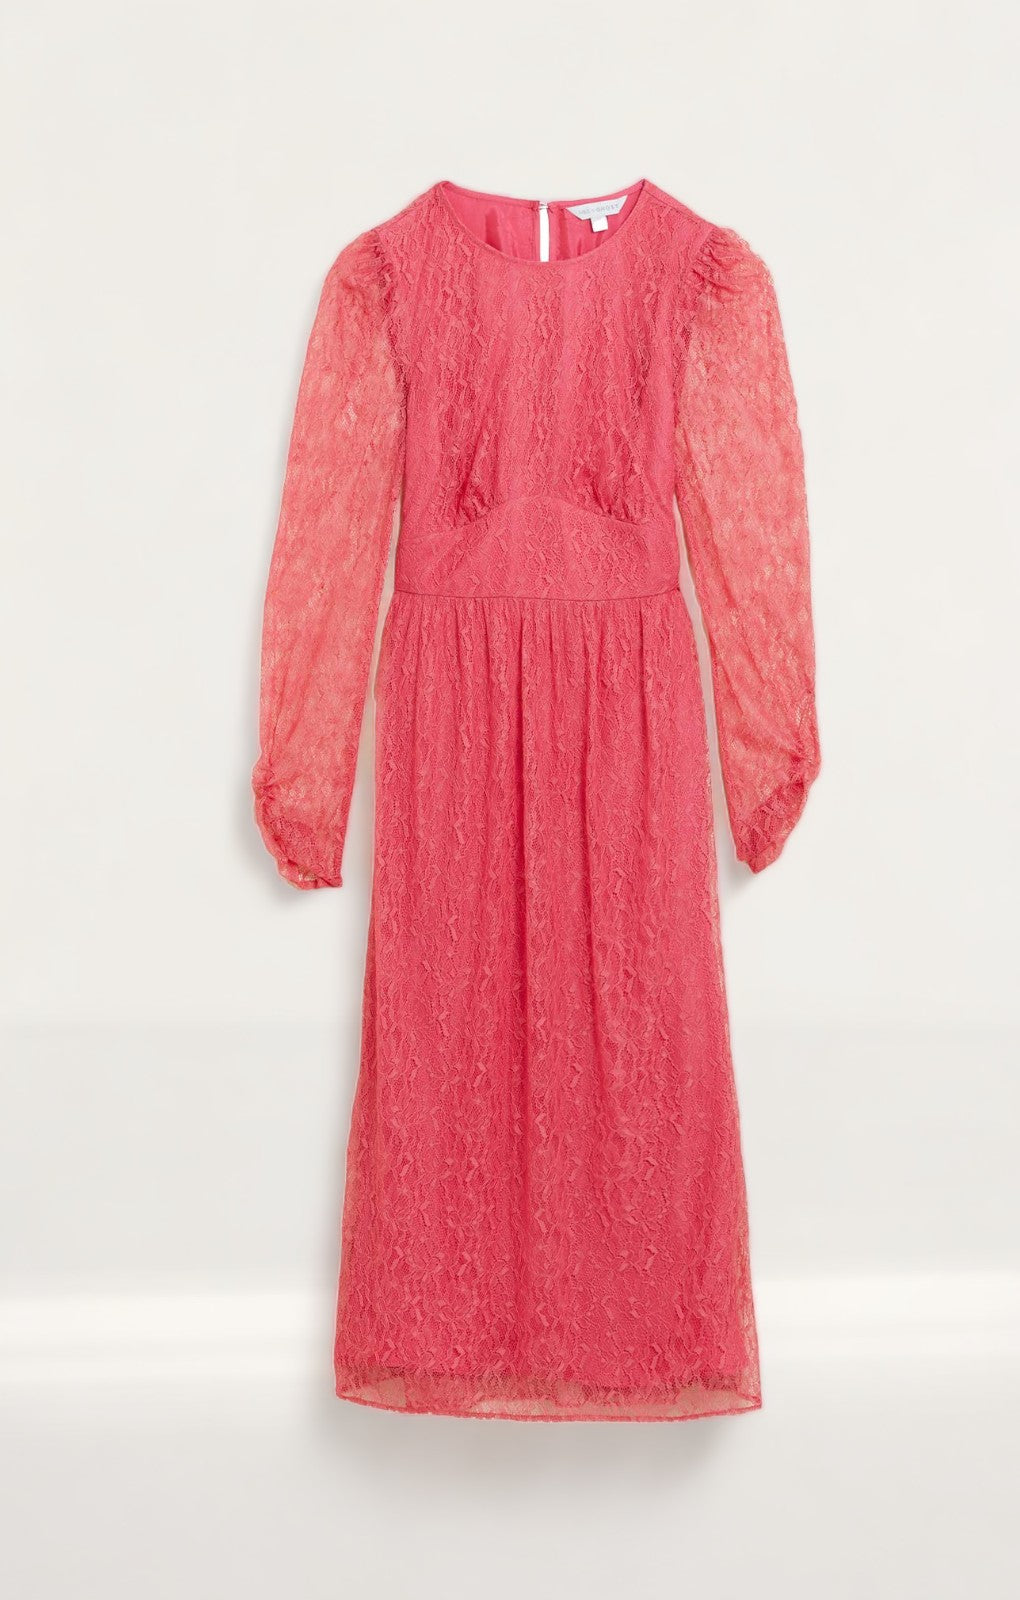 M&S X Ghost Lace Midi Dress product image